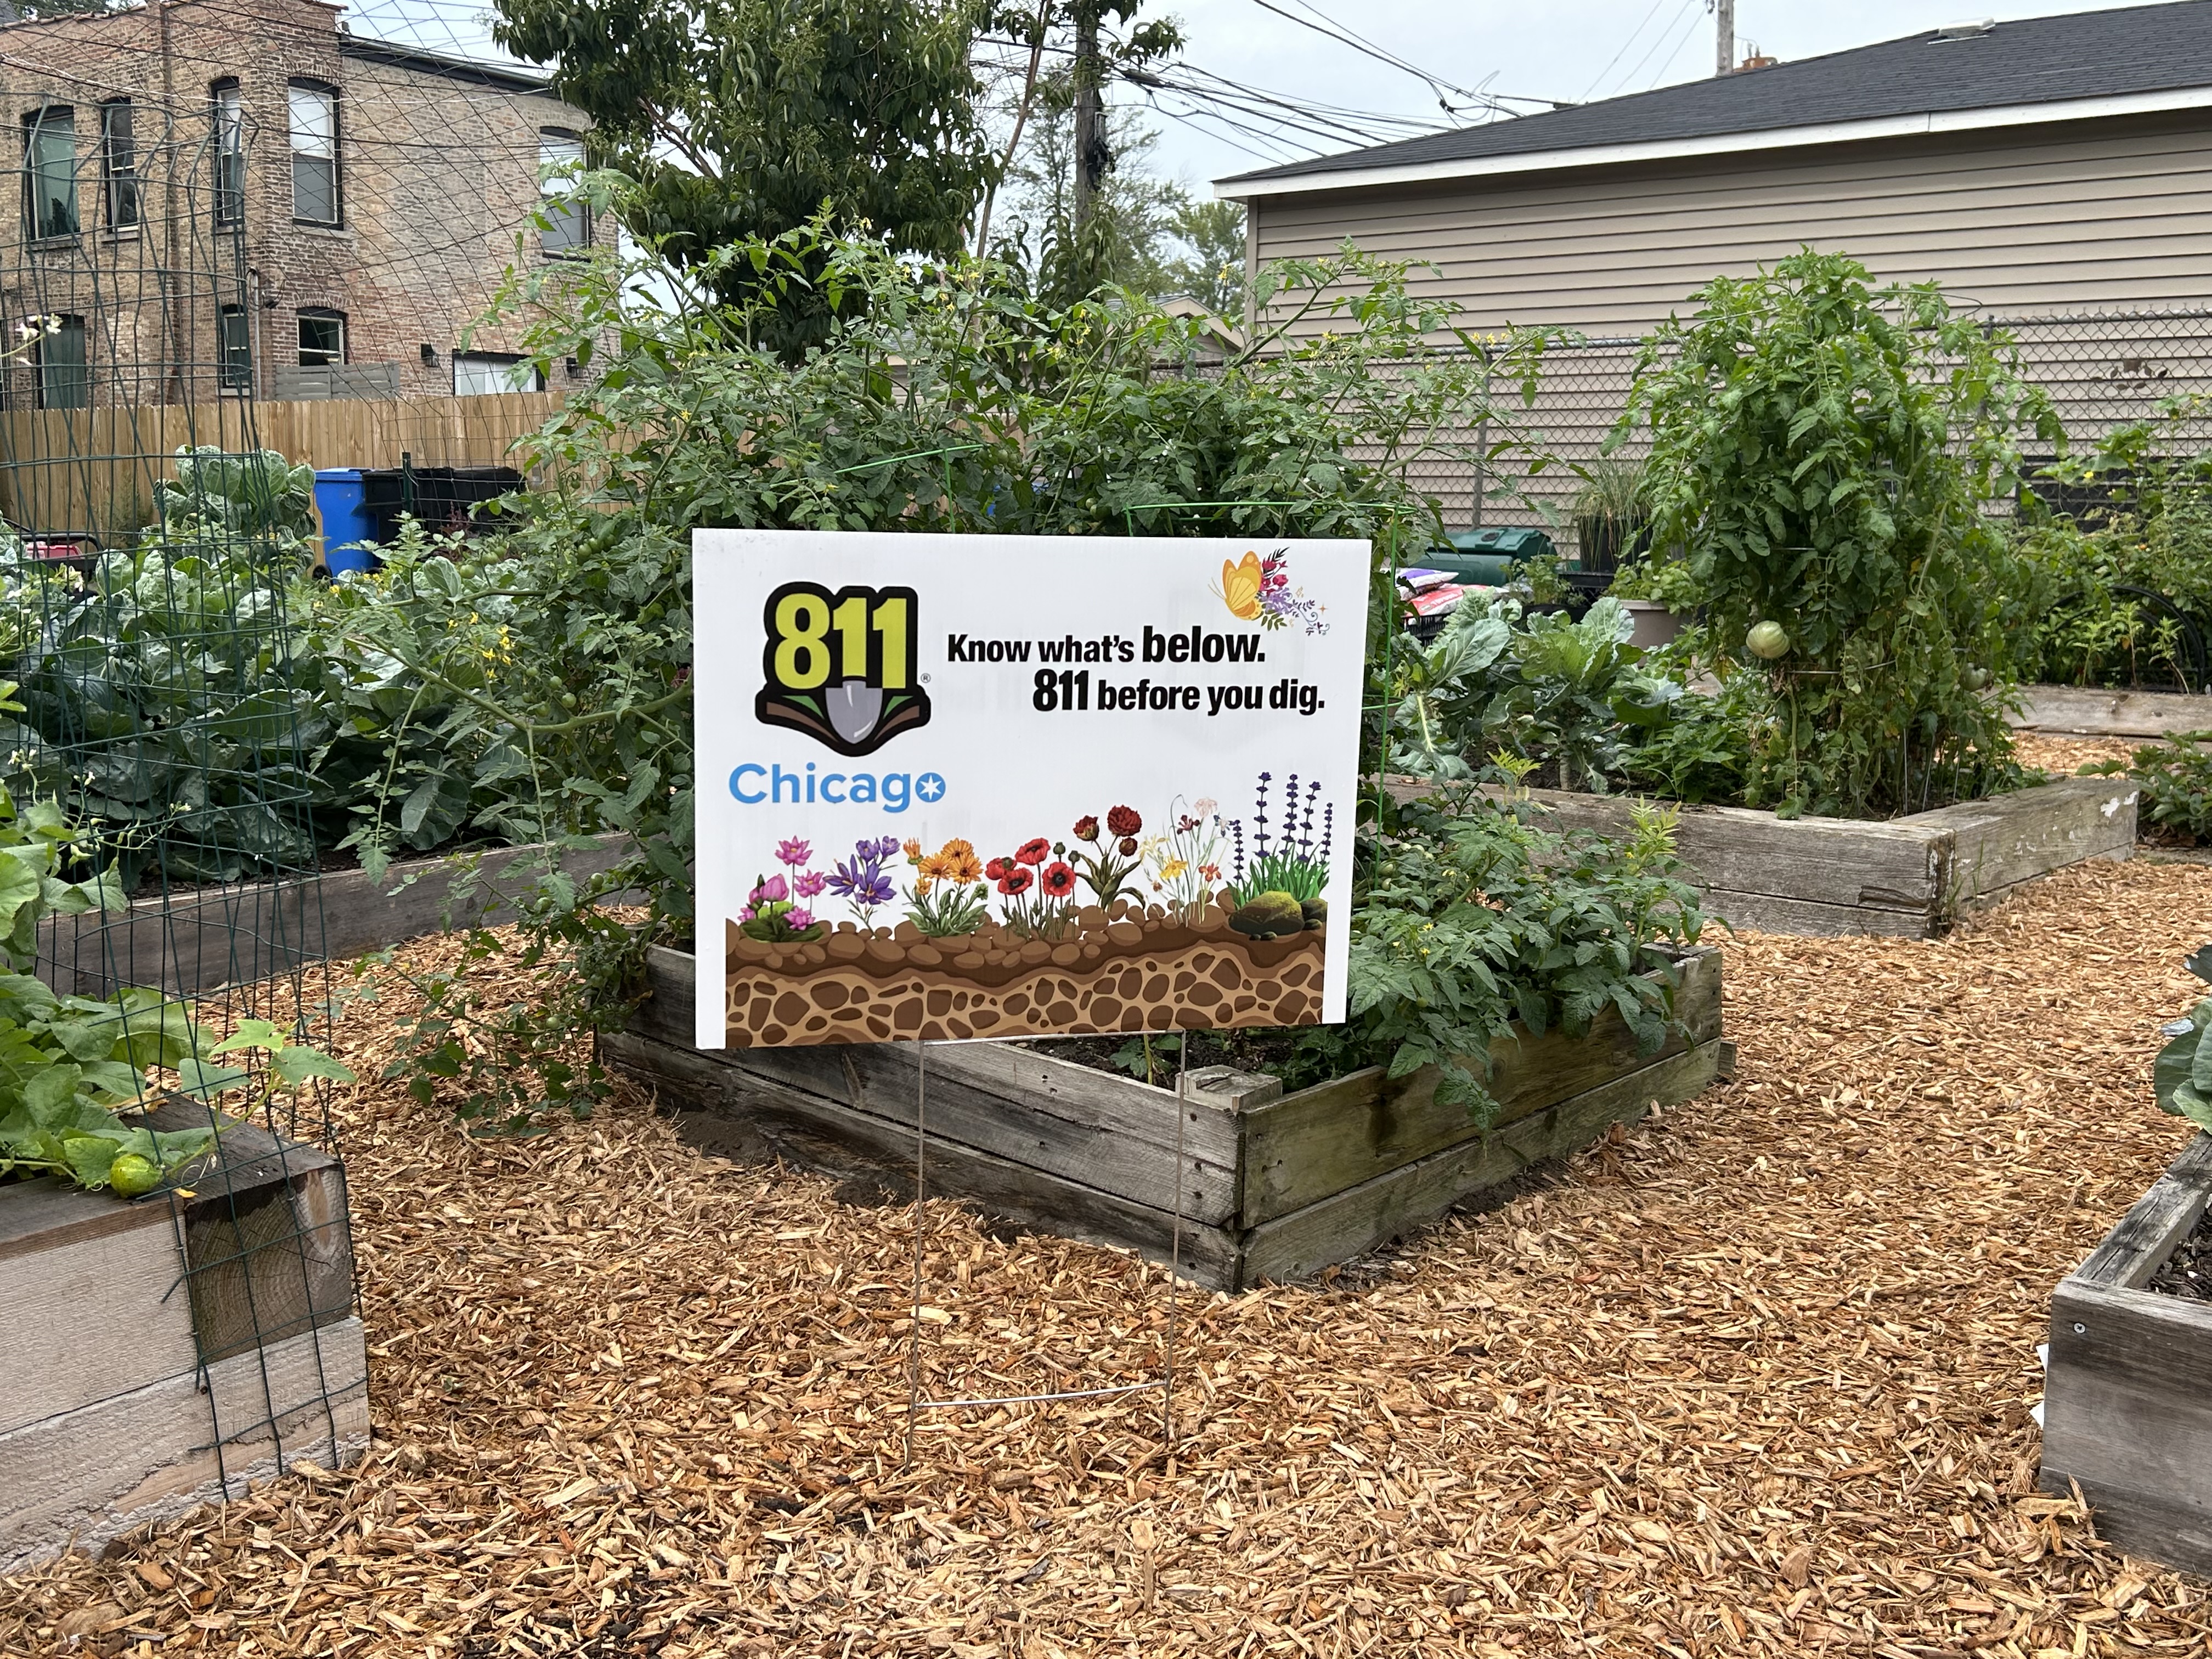 Raised garden beds with a sign that says "811 Chicago Know What's Below. 811 Before You Dig"